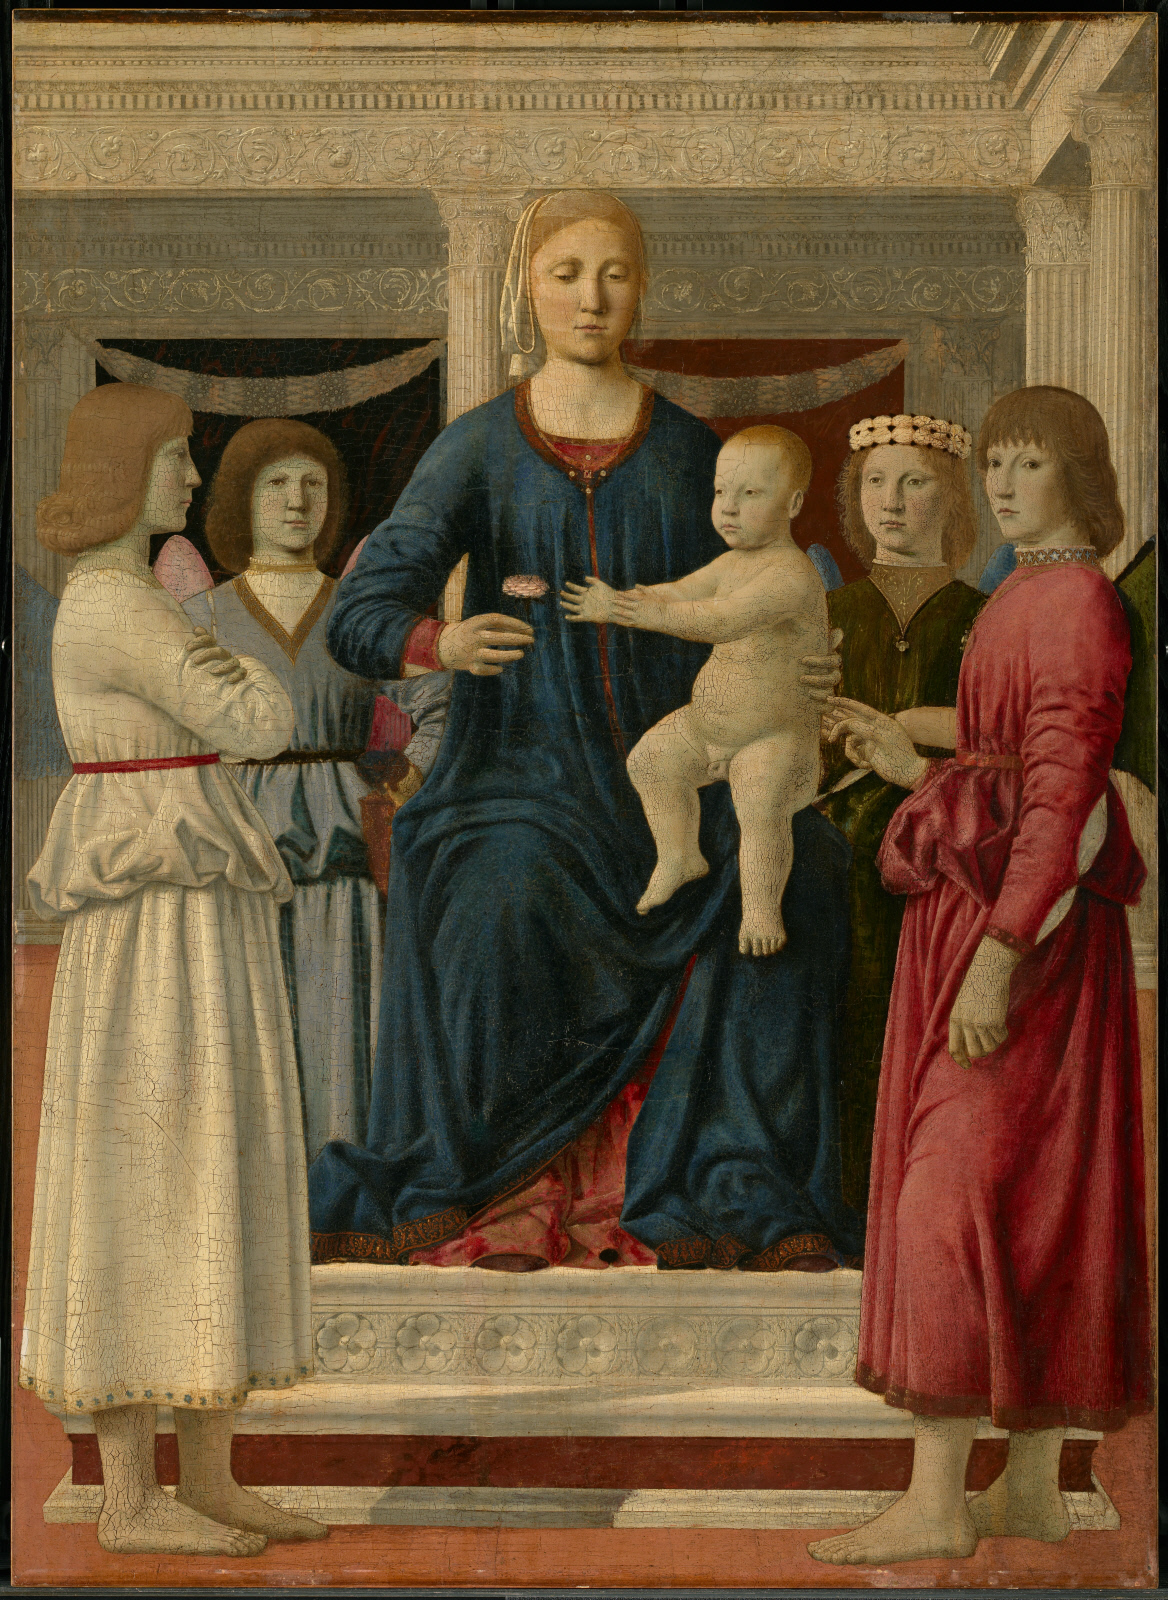 Virgin and Child Enthroned with Four Angels by Piero della Francesca - c. 1460–70 - 107.8 x 78.4 cm The Clark